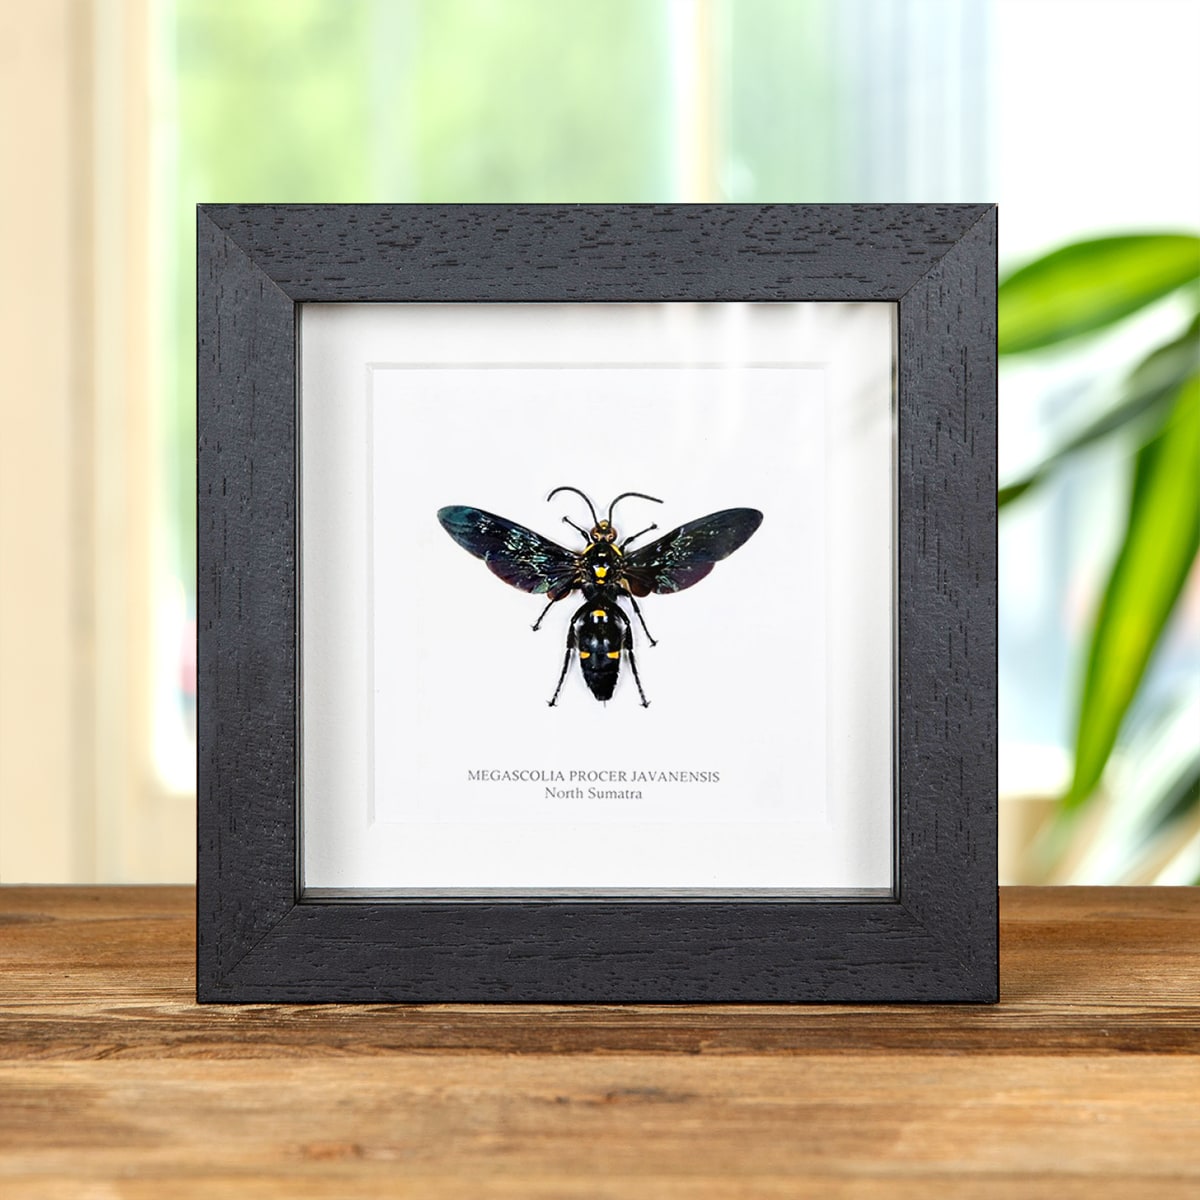 Minibeast Giant Scoliid Wasp in Box Frame (Megascolia procer javanesis)